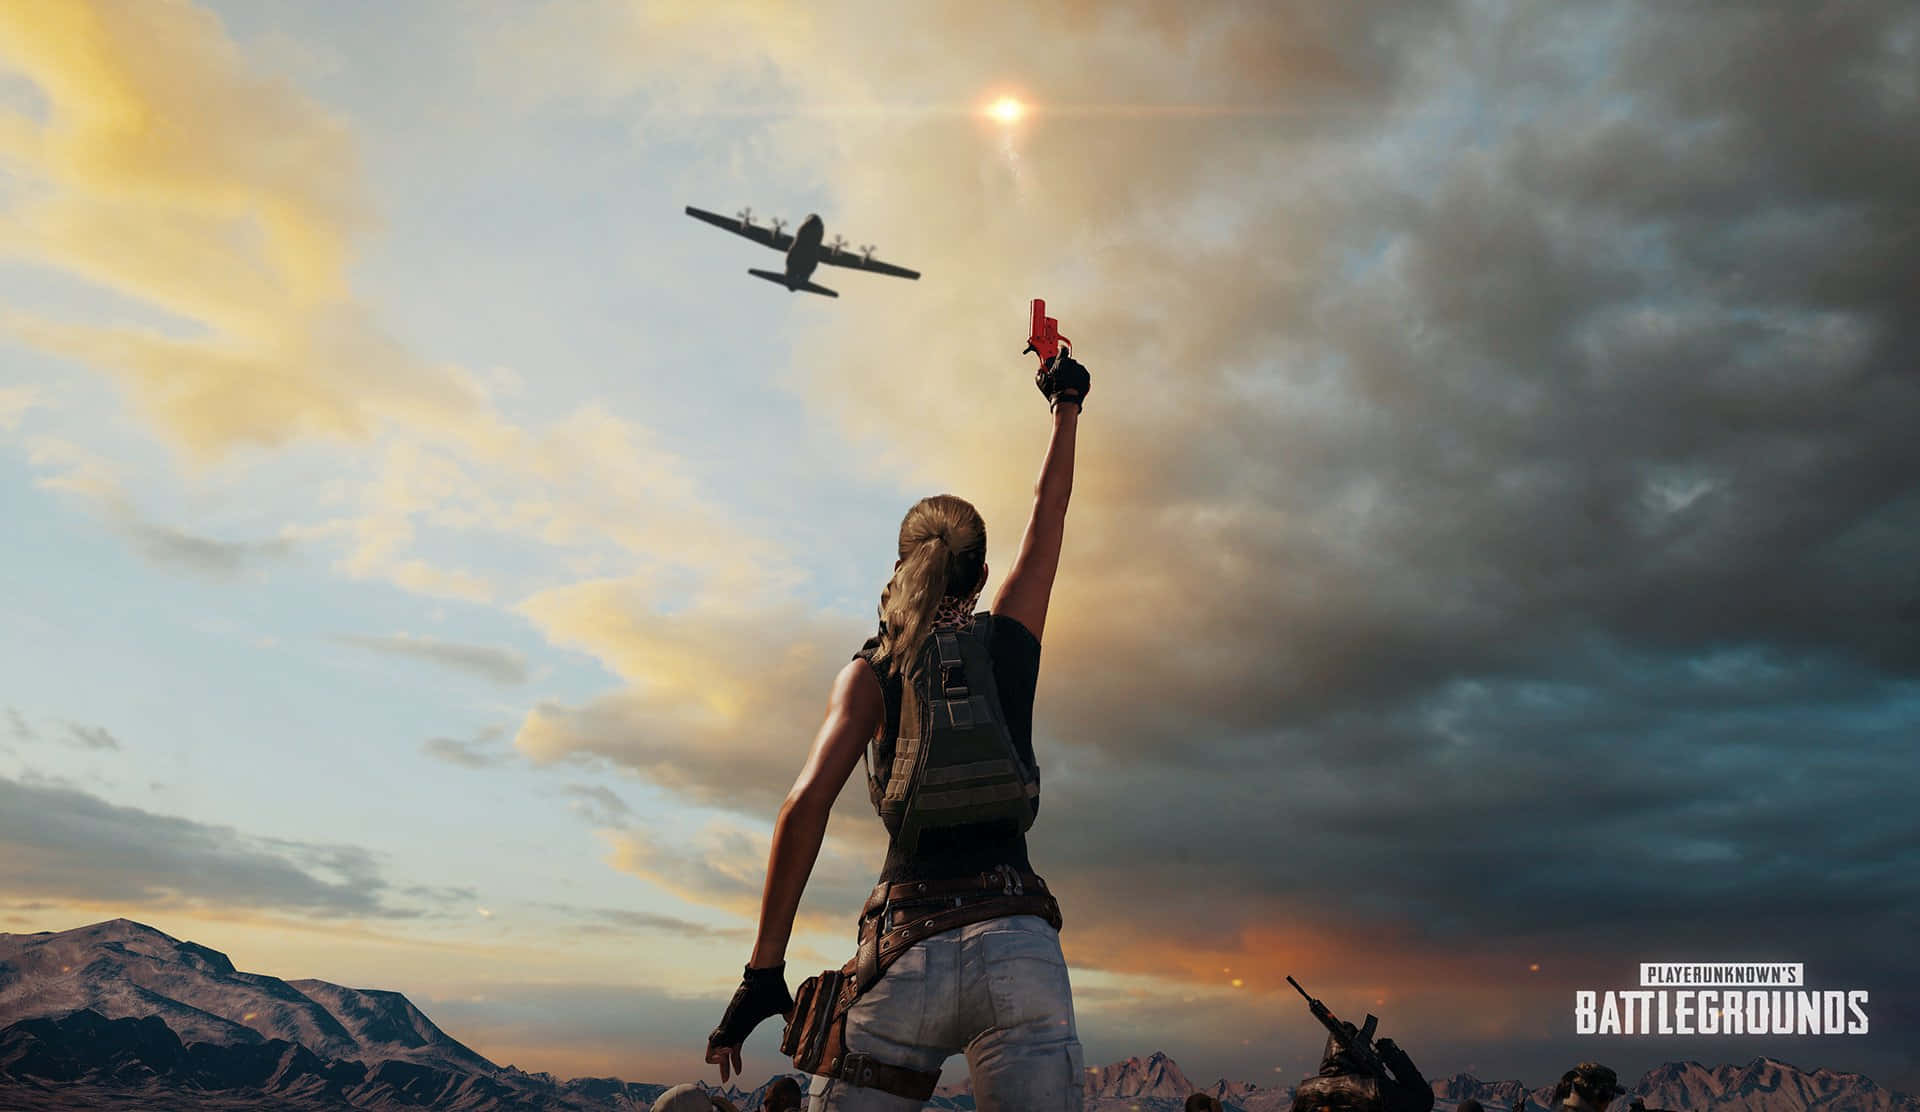 Be the last one standing in Playerunknown's Battlegrounds